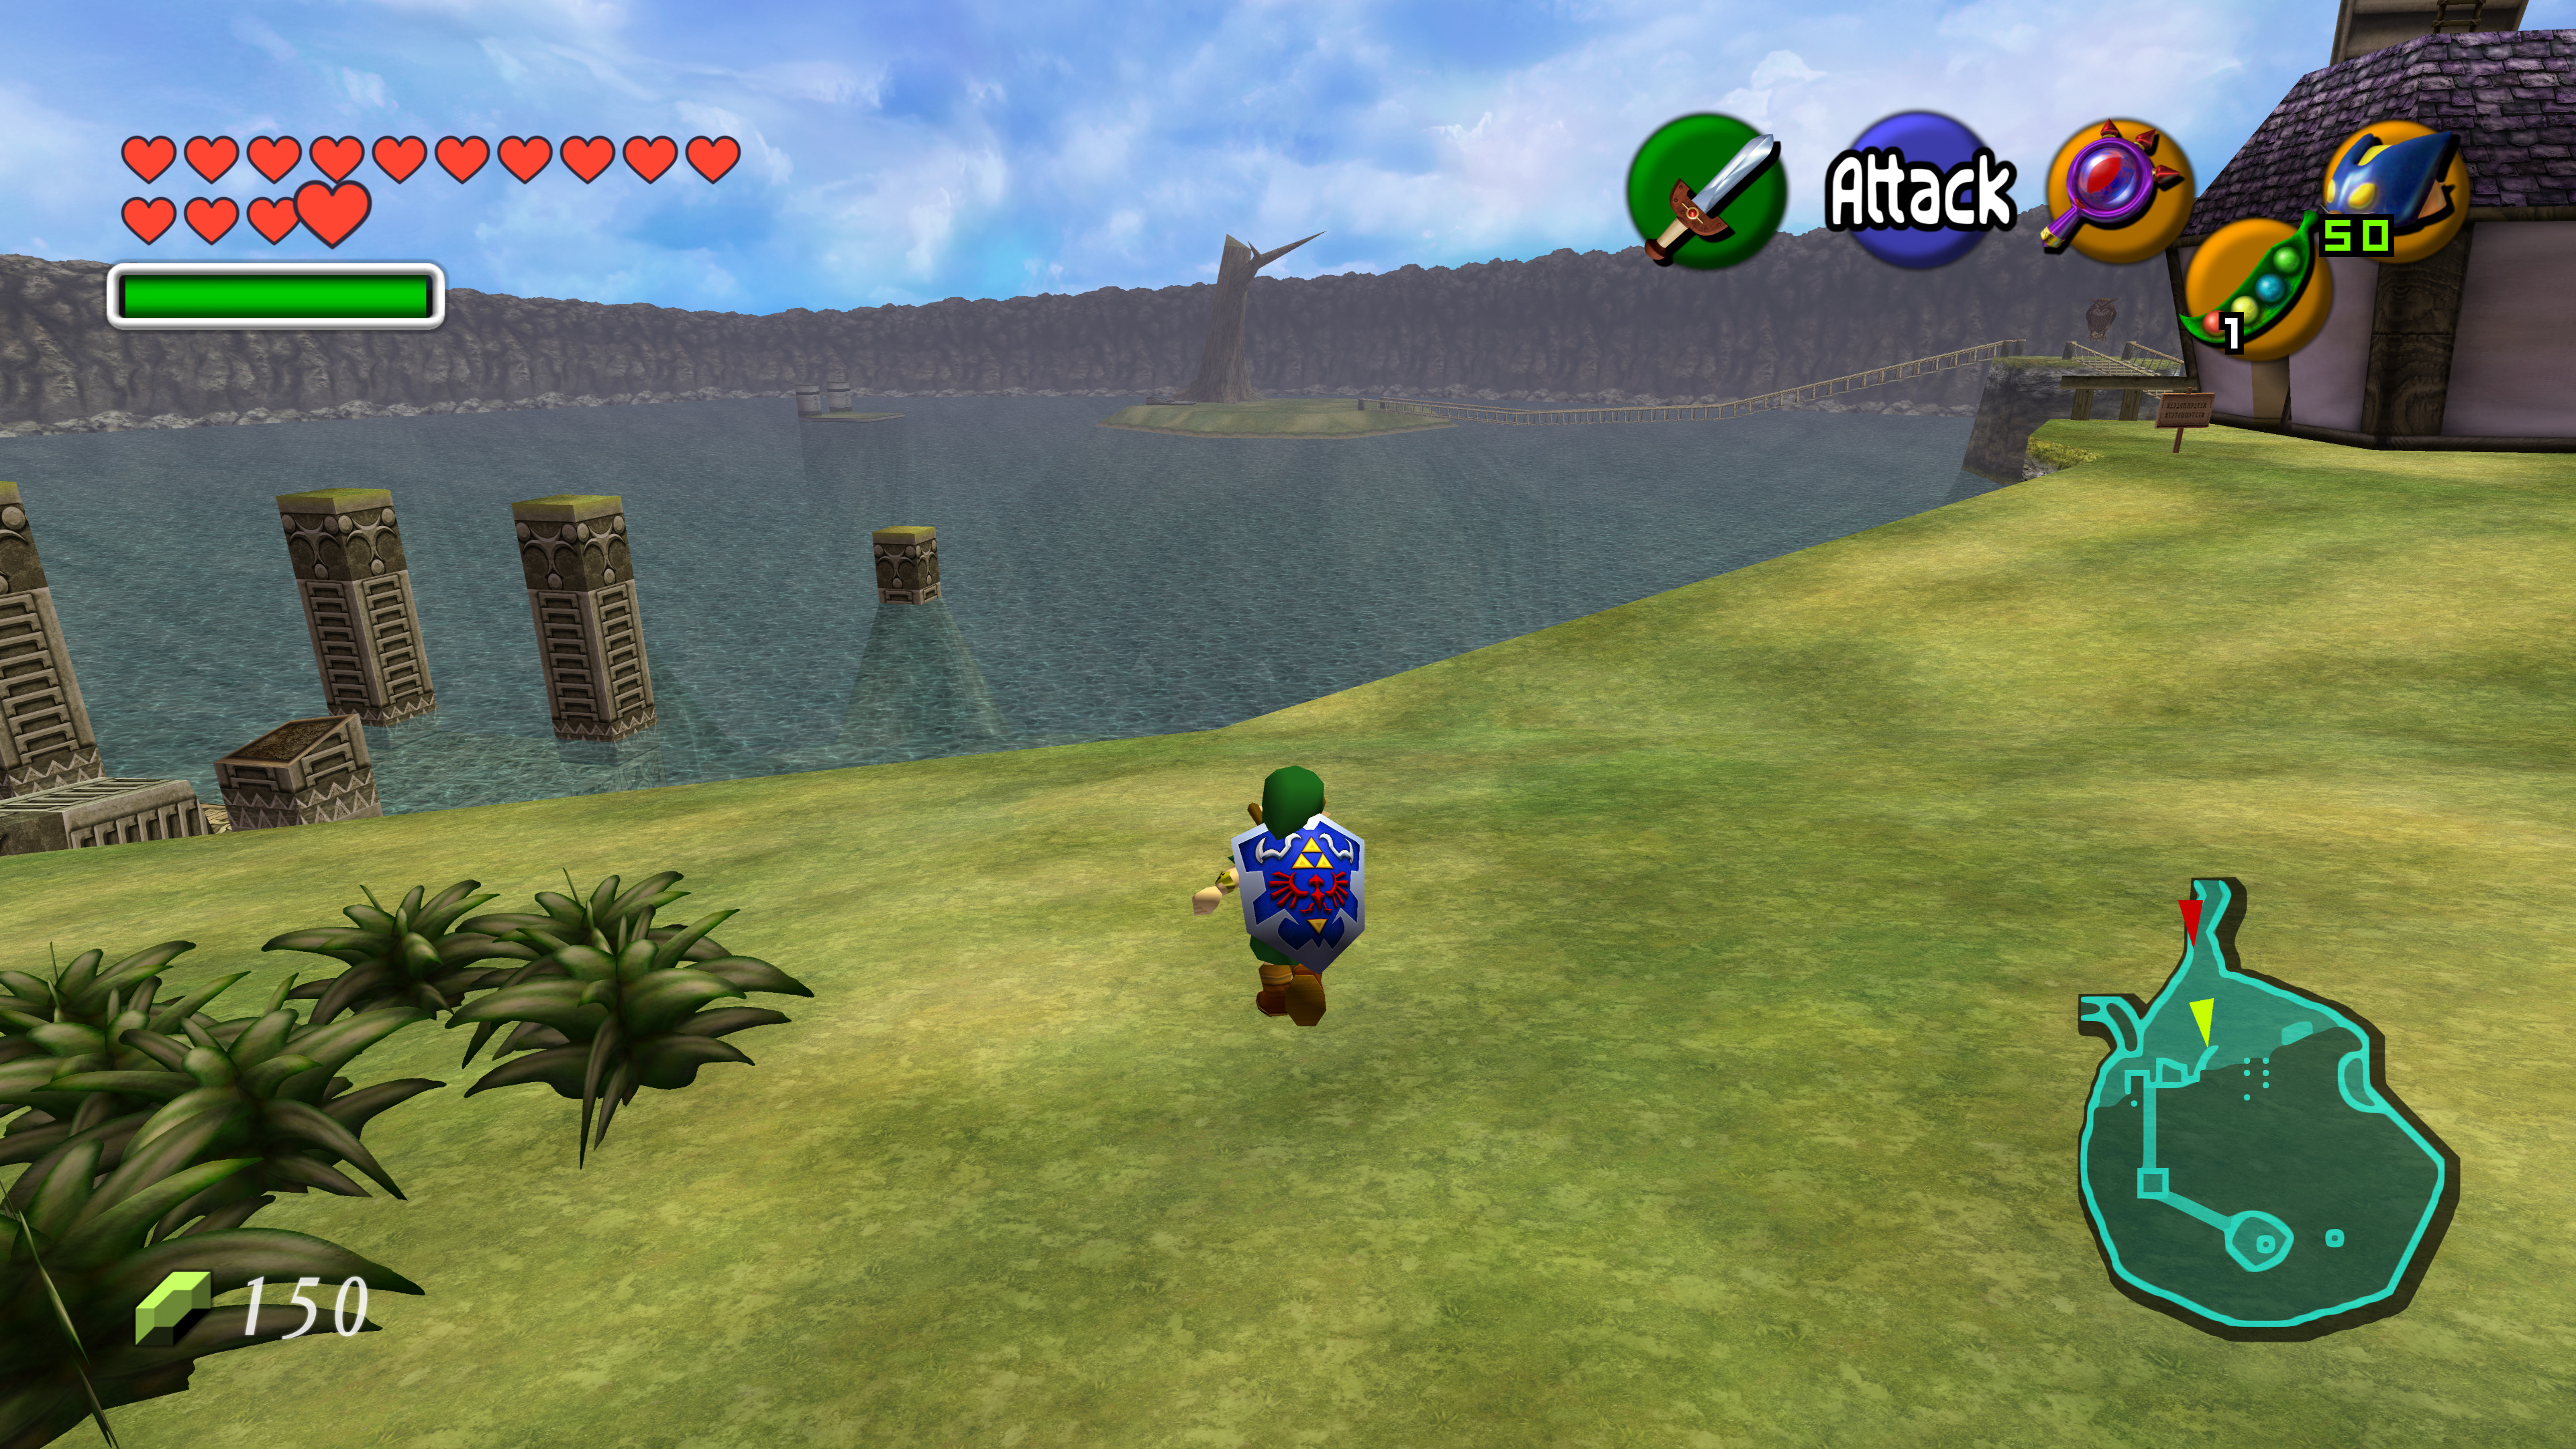 New Mod Makes Everything Explode in Unofficial Ocarina of Time PC